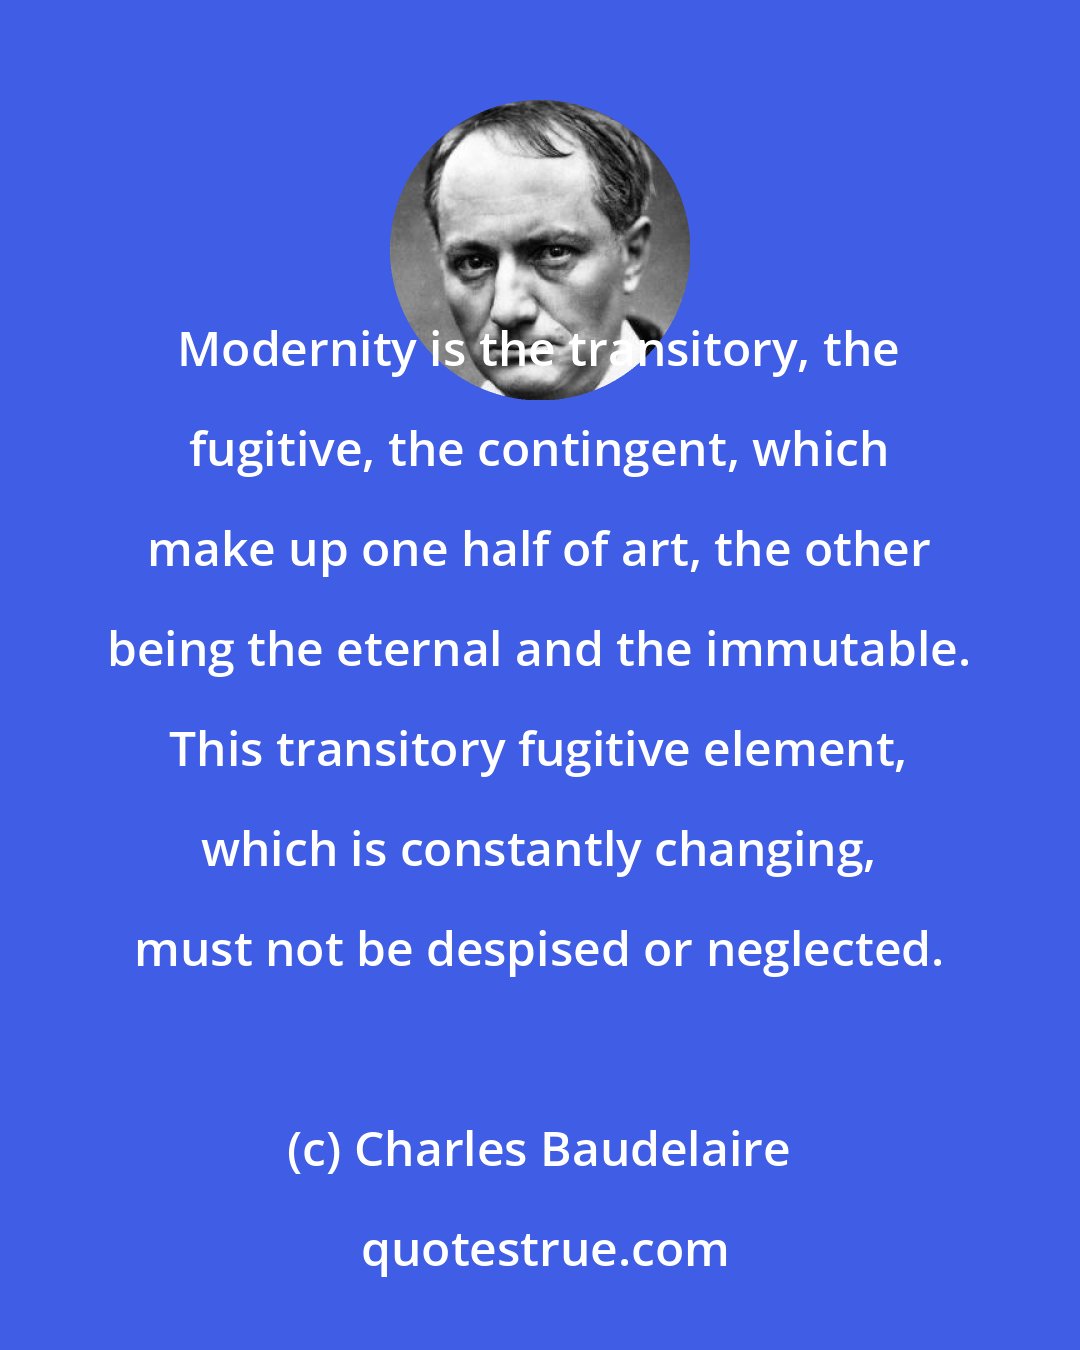 Charles Baudelaire: Modernity is the transitory, the fugitive, the contingent, which make up one half of art, the other being the eternal and the immutable. This transitory fugitive element, which is constantly changing, must not be despised or neglected.